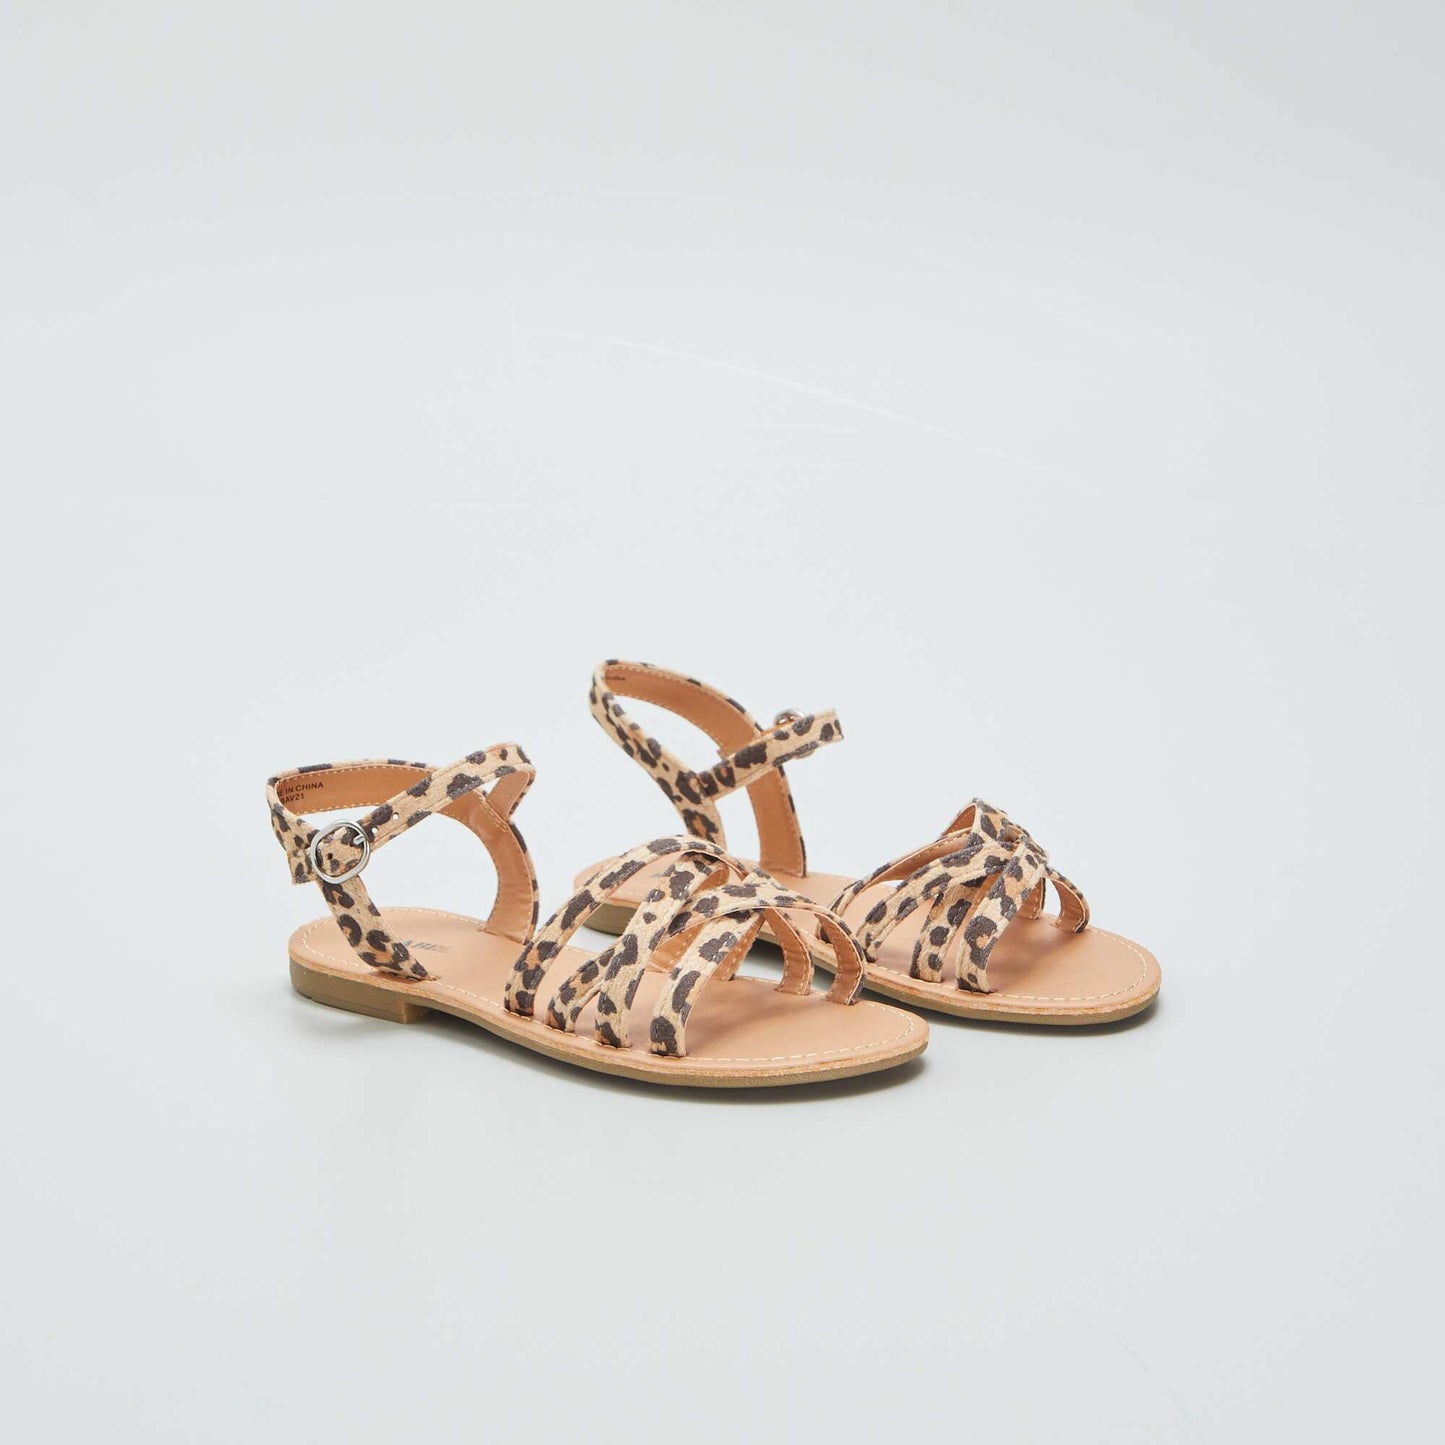 Sandals with crossover straps - leopard print BROWN